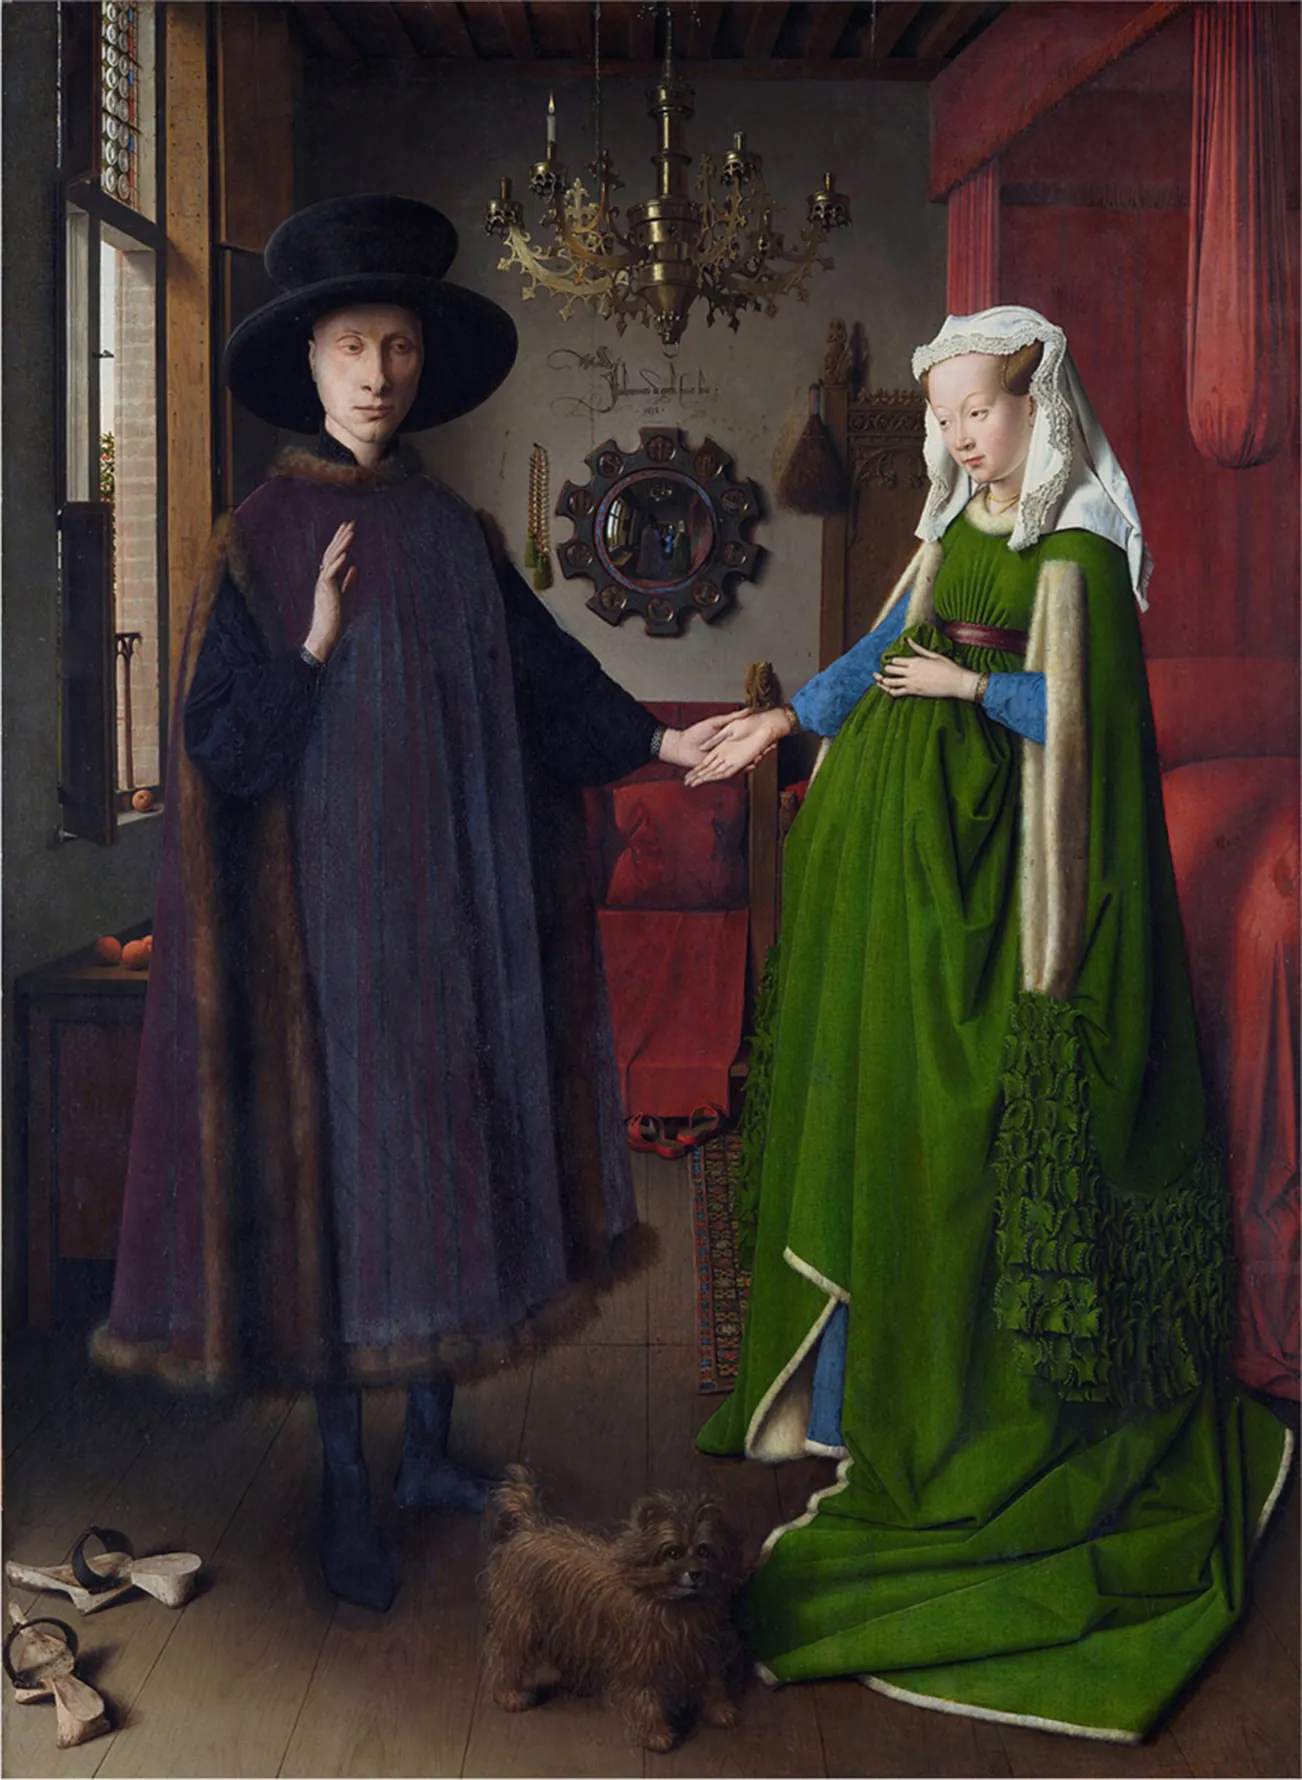 An image of a painting is shown. A man and a woman are shown standing in a room with a dark red bed with a canopy on the right and a red covered wood piece of furniture in the background. The floor is brown wood and a richly decorated rug can be seen at the foot of the bed. A large round mirror hangs on the back wall with notches in the dark frame. A chandelier hangs down from the ceiling in the middle and a window is seen at the left. Round orange objects are seen laying on the window sill as well as on a table in front of the window. The man is on the left and wears a large black brimmed hat, has a pale face, large nose, and wears long blue and purple robes trimmed in fur at the edges. His left hand extends to the woman whose right hand is palm facing up in his left hand. She wears her brown hair up in cones at the sides of her head covered in a lace trimmed white cloth, long rich green layered dress with blue sleeves showing out from the cloak. She has a pale face and wears a necklace. A small brown furry animal with a short tail is at their feet and a pair of clogs with black straps is shown in the bottom left corner of the image.